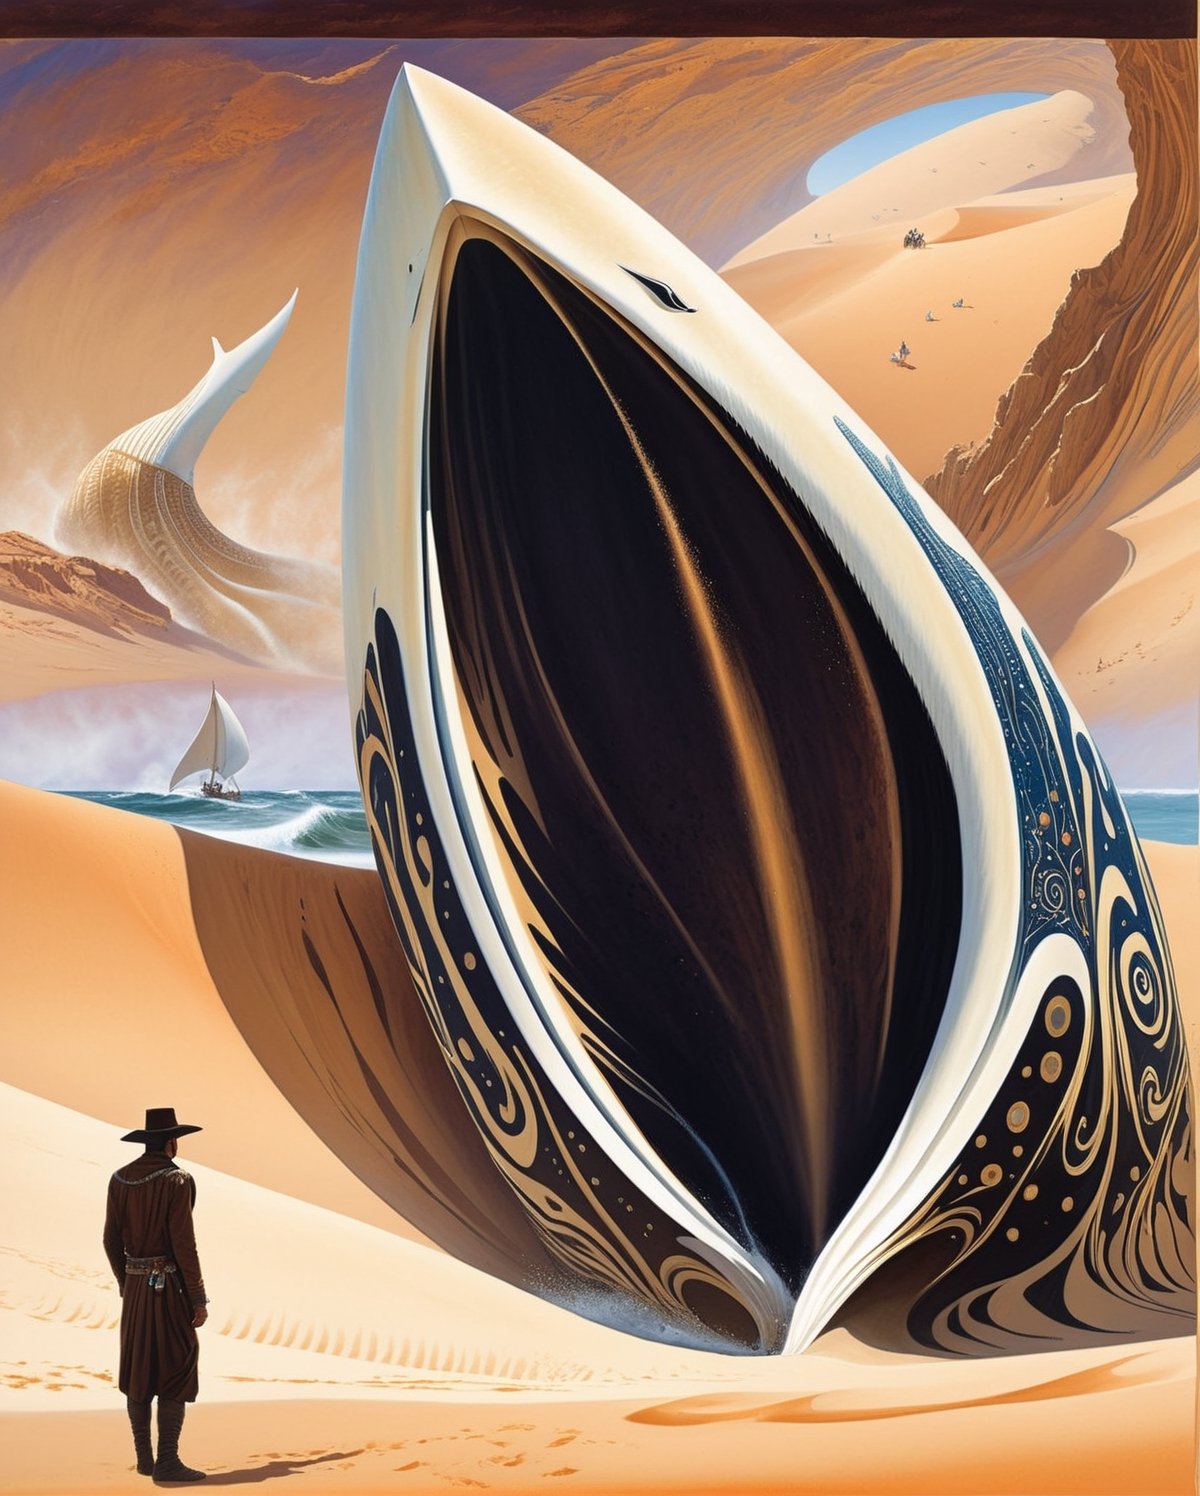 In this stunning and surreal illustration, the vast, sandy sea of "Dune's" desert planet merges with the mystique of "Moby-Dick." A colossal sand whale, a majestic yet menacing creature, breaches the dunes, creating a breathtaking spectacle. Beside it, a lone man dressed in a blend of futuristic and seafaring attire stands with awe-struck determination. The swirling sands around them form intricate patterns, bridging the cosmic vastness of the desert and the maritime allure of the great white whale. This captivating image encapsulates the essence of adventure in a desert ocean teeming with mythical wonder.